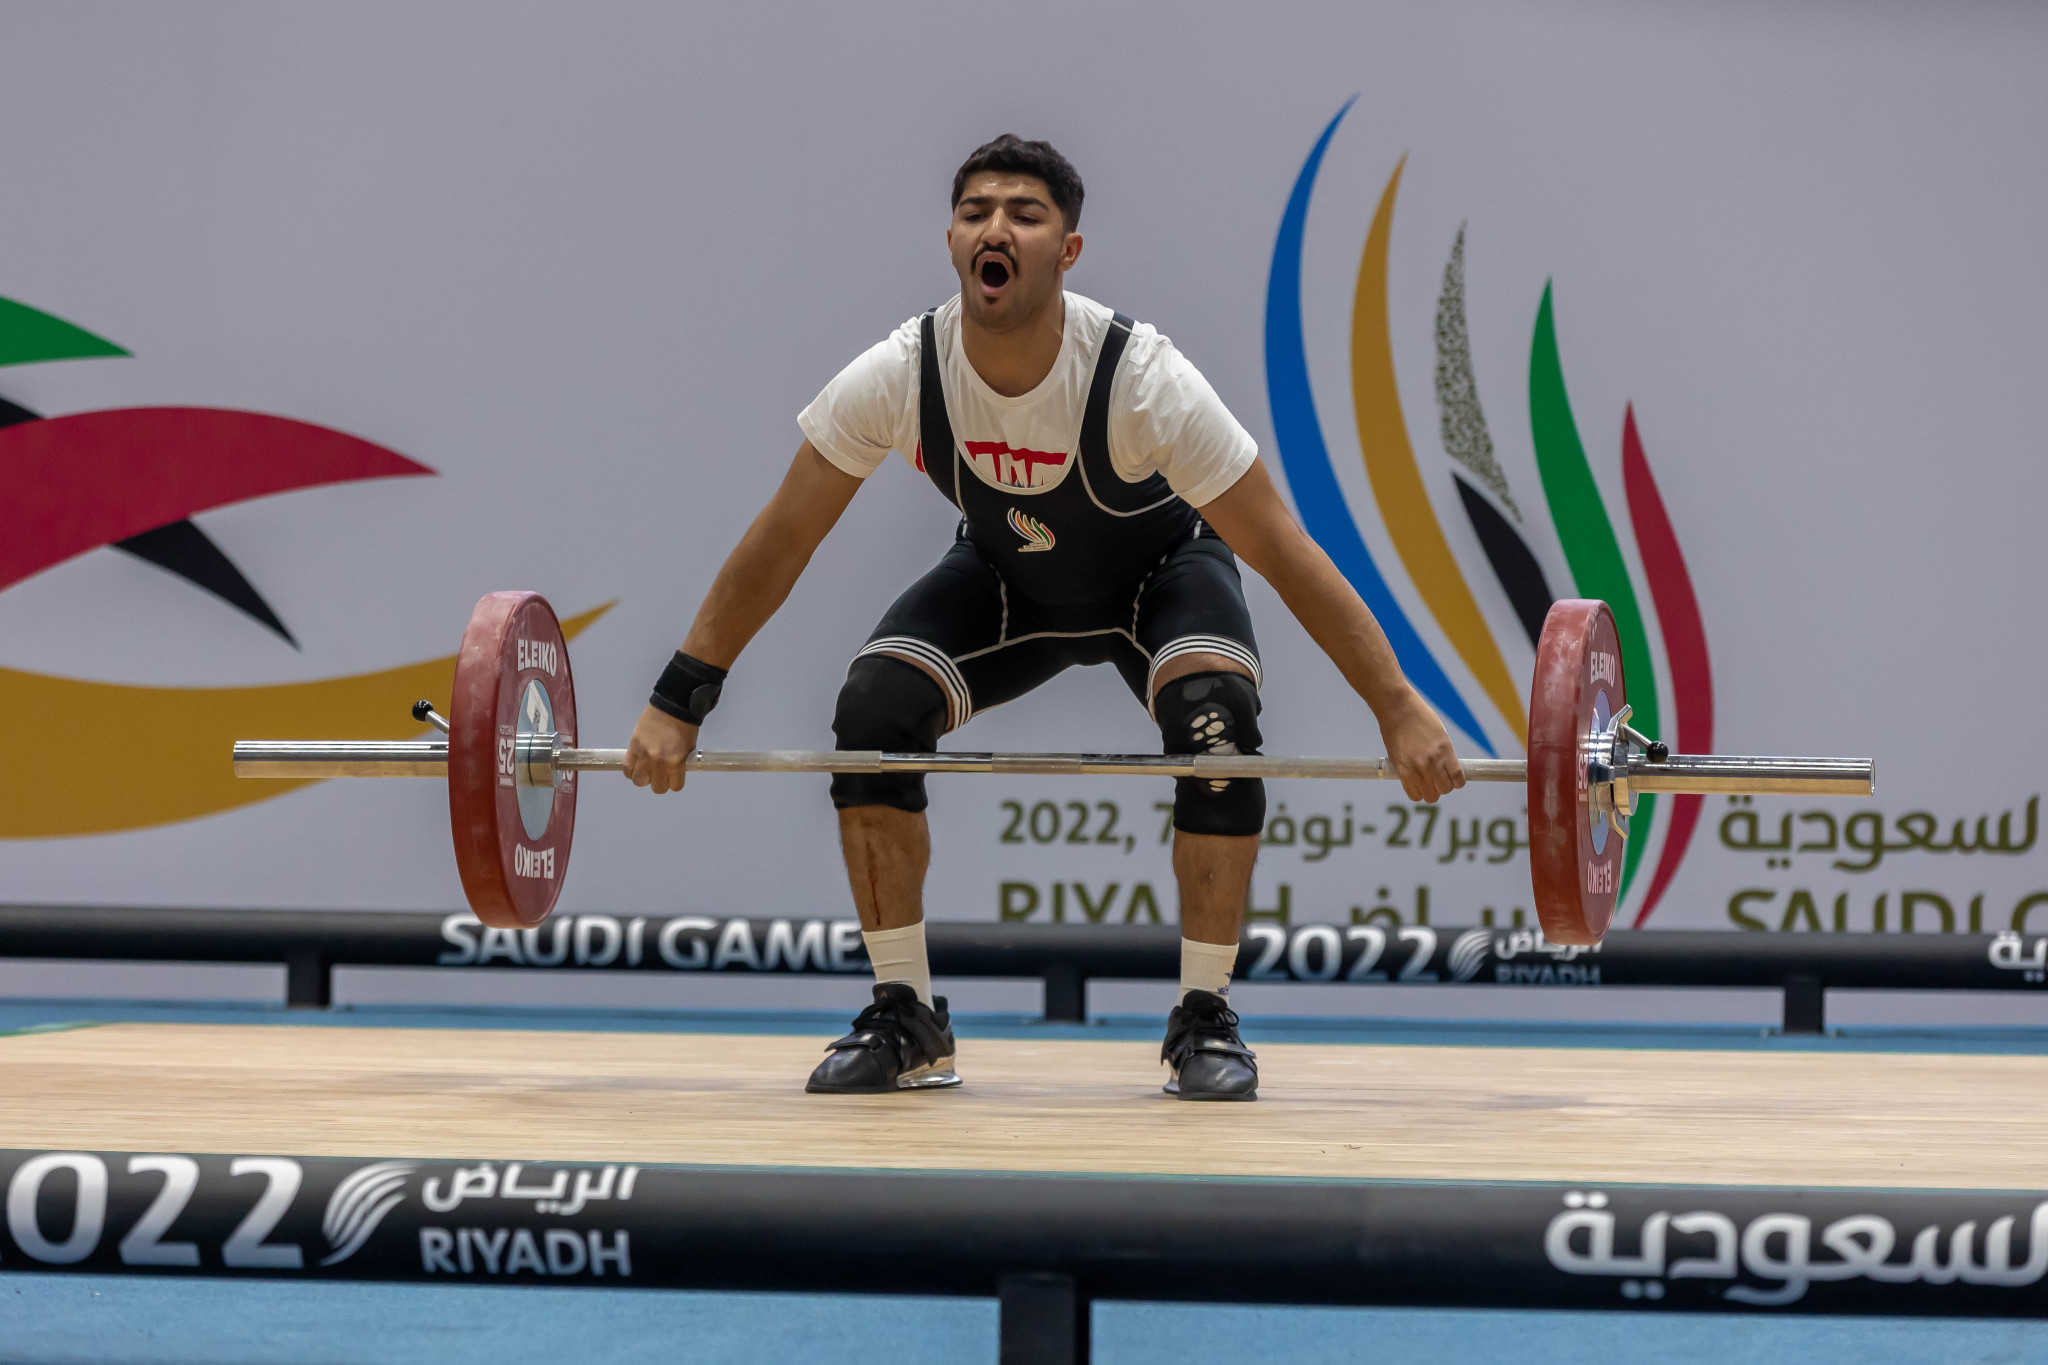 Saudi Games: Day two of competition